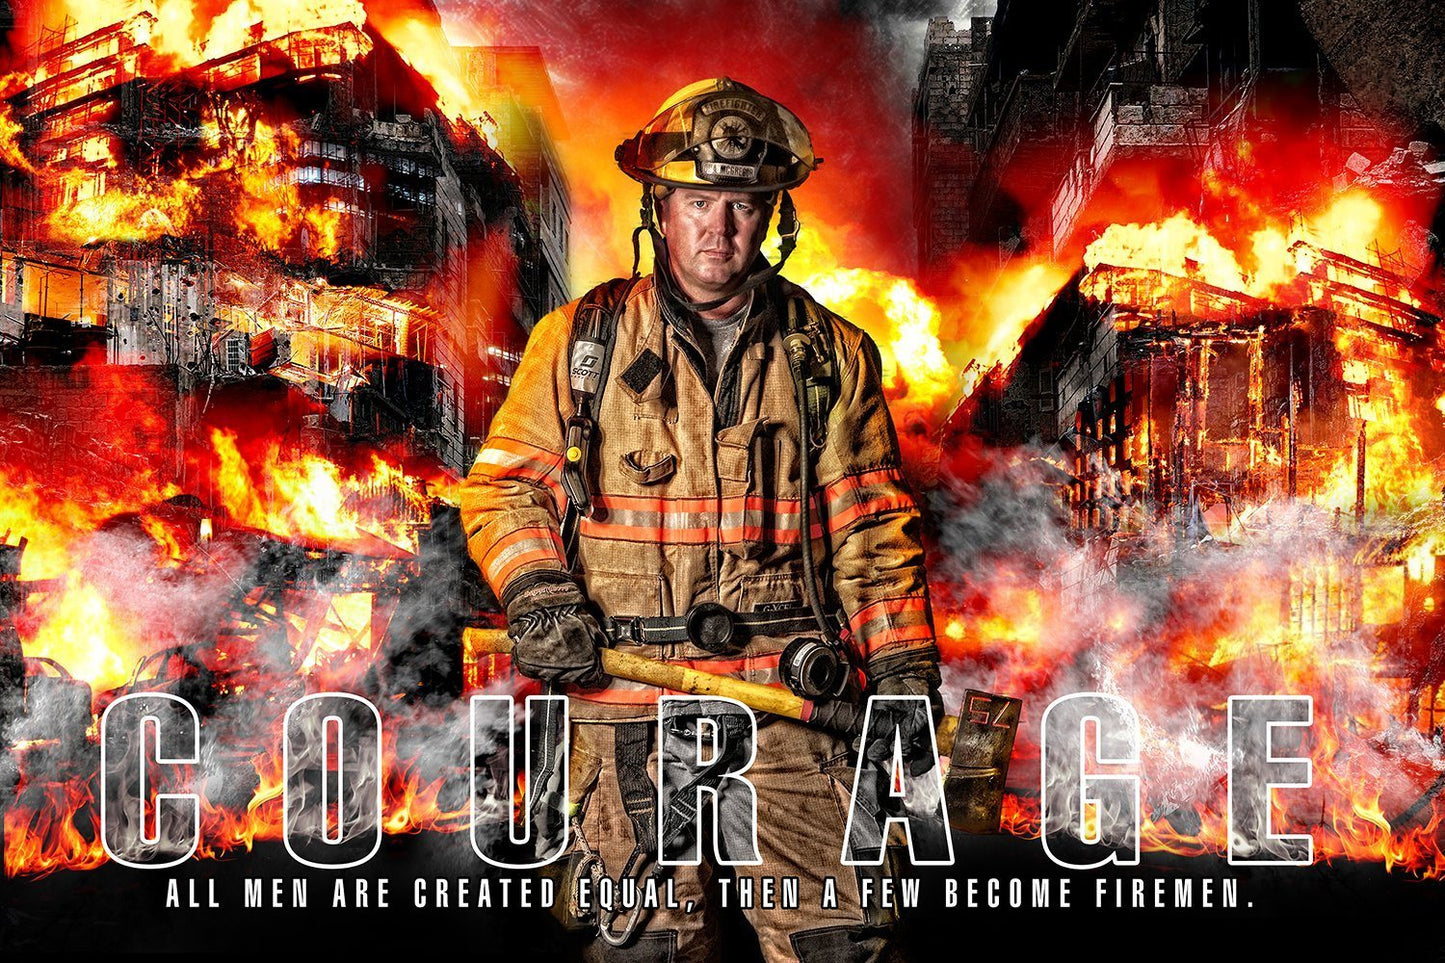 Fireman - V.1 - Heroes Series - Poster/Banner H-Photoshop Template - Photo Solutions